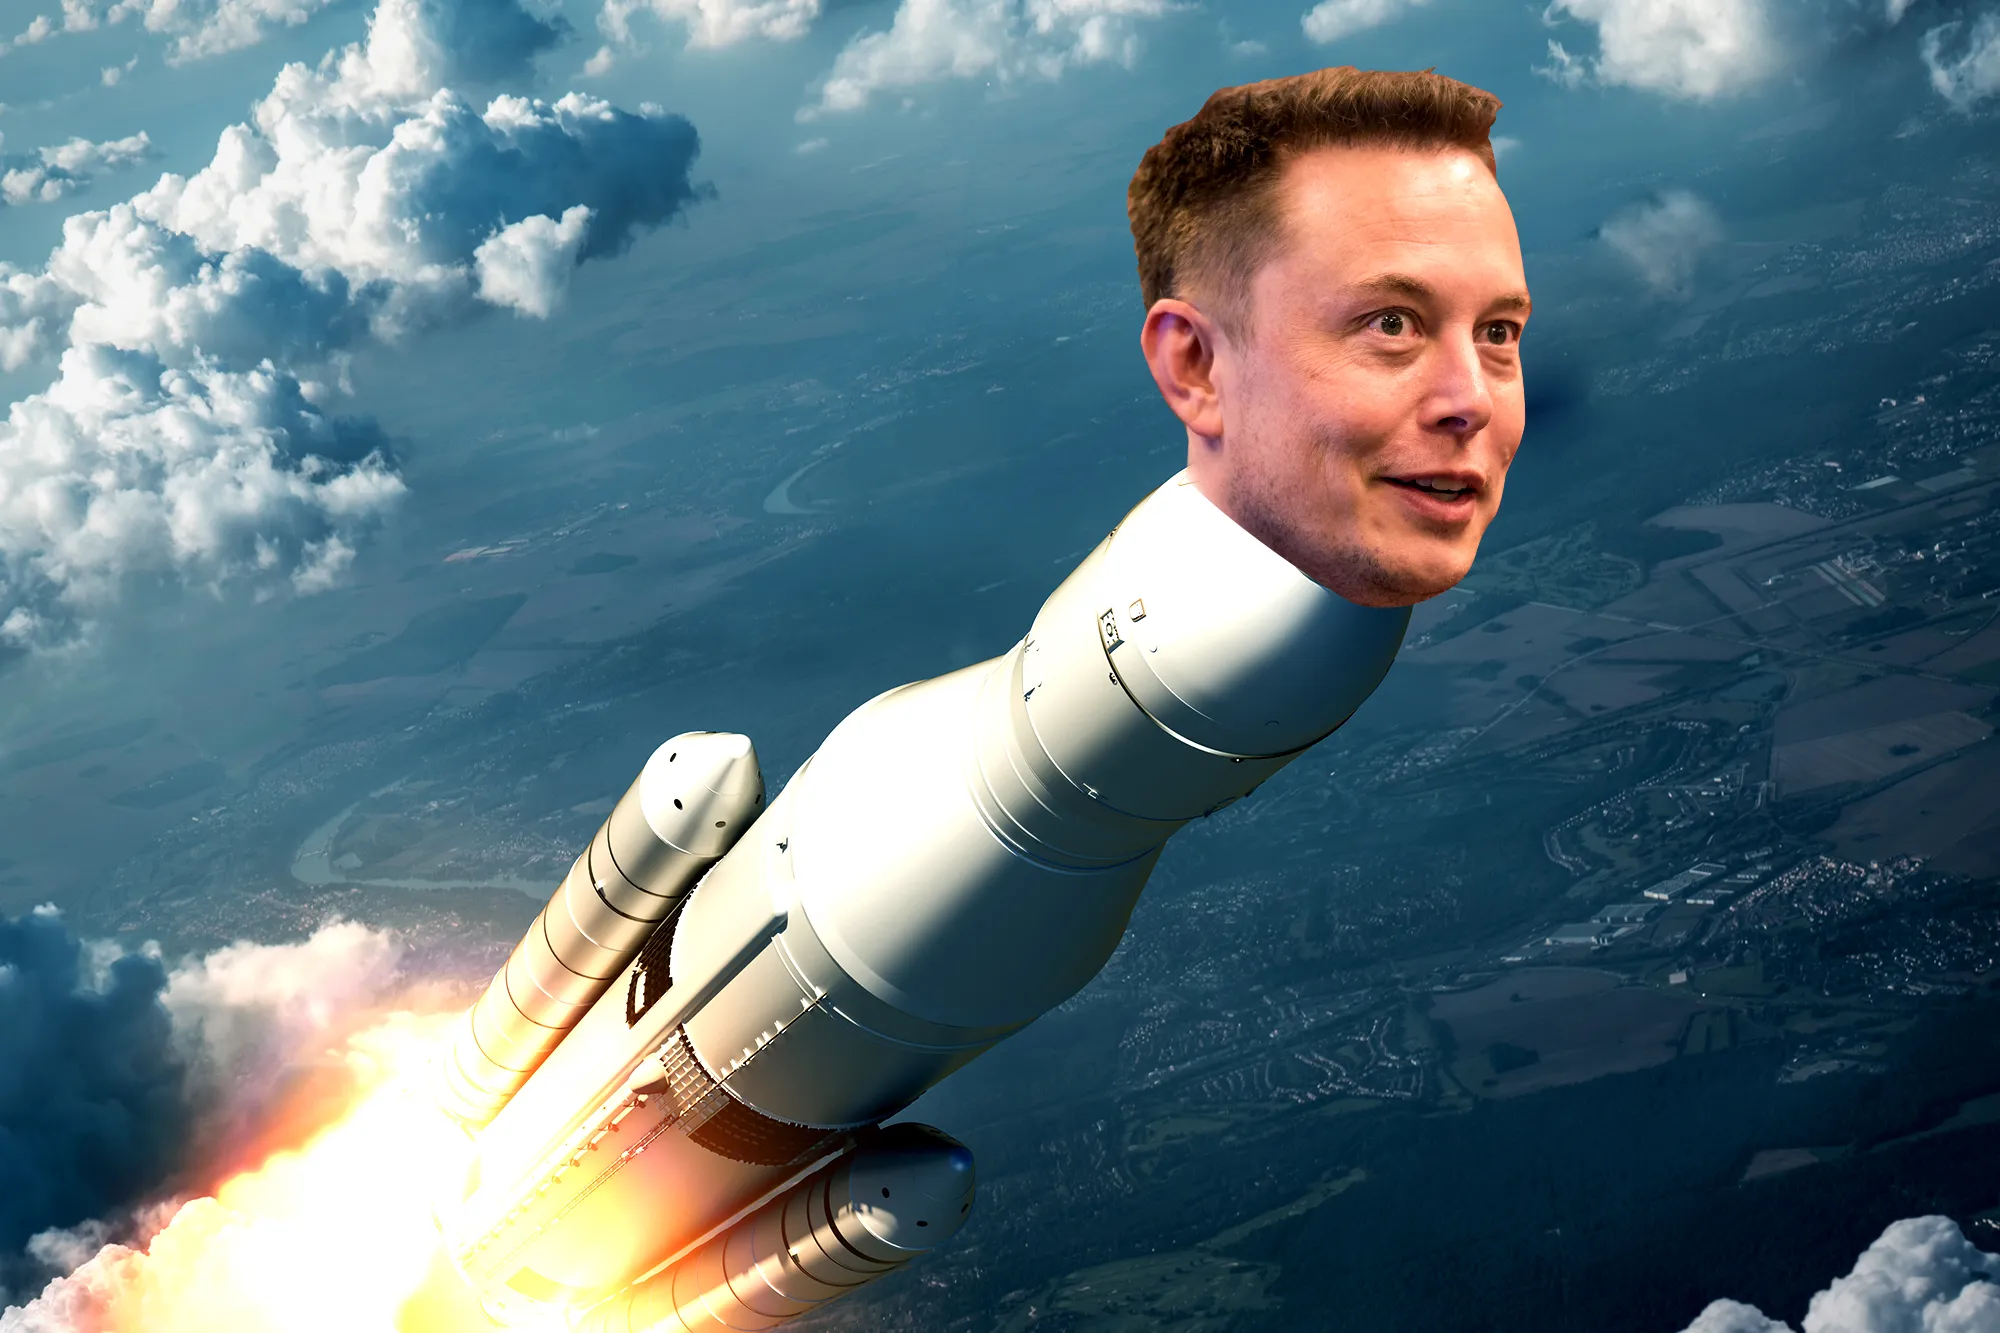 Elon Musk Plans To Make Mars Missions Affordable for Everyday People